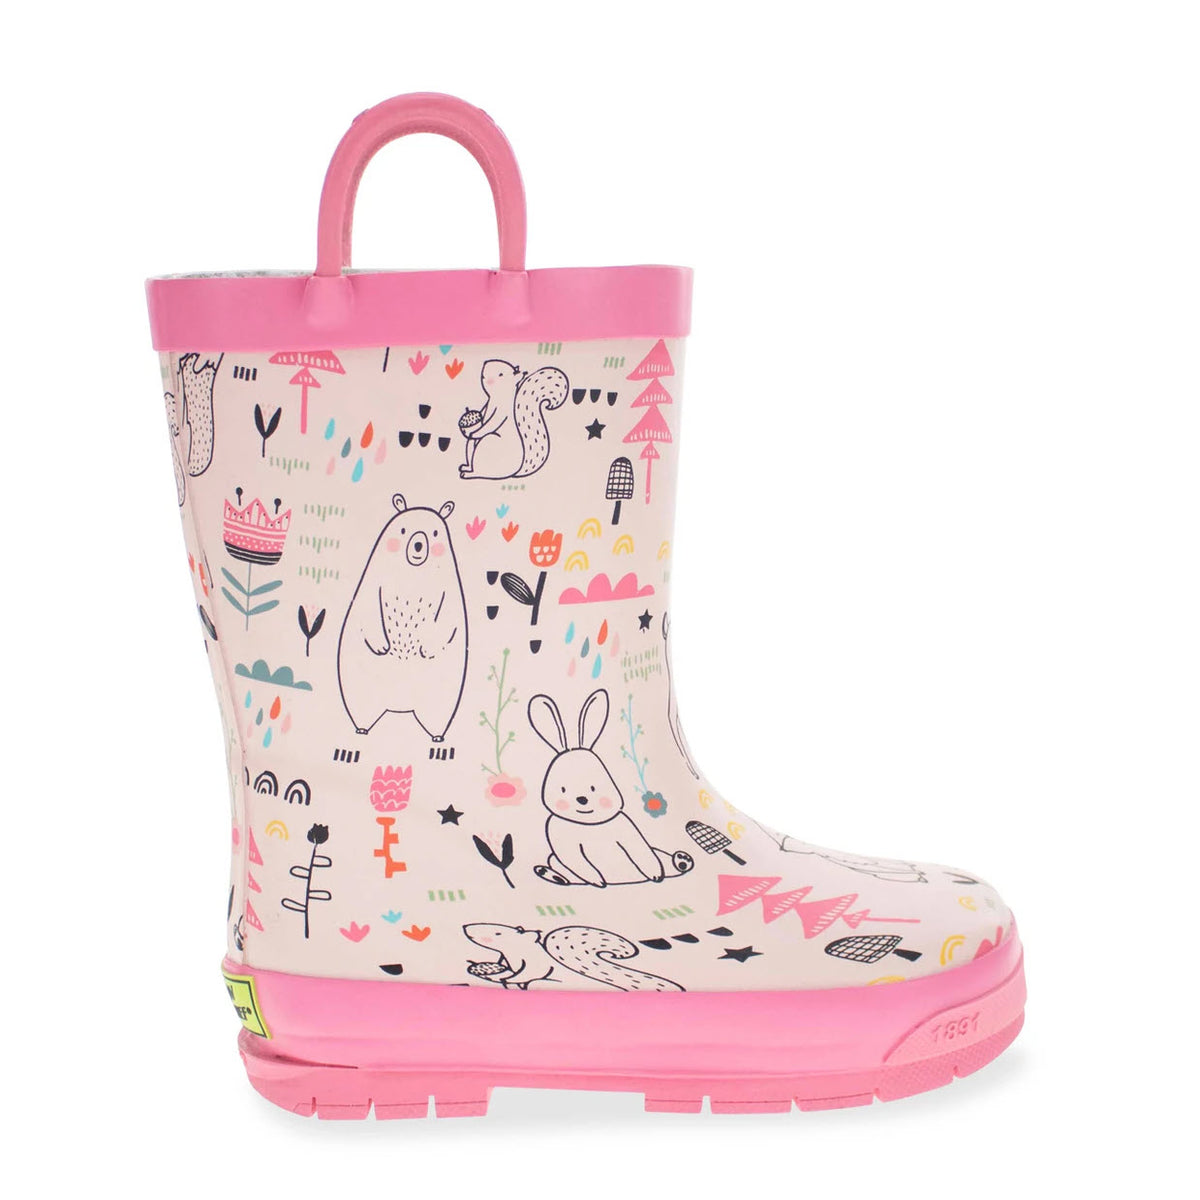 A child&#39;s WESTERN CHIEF RUBBER BOOT FOREST DOODLE CREAM - KIDS rain boot with animal and nature illustrations, featuring a doodle print.